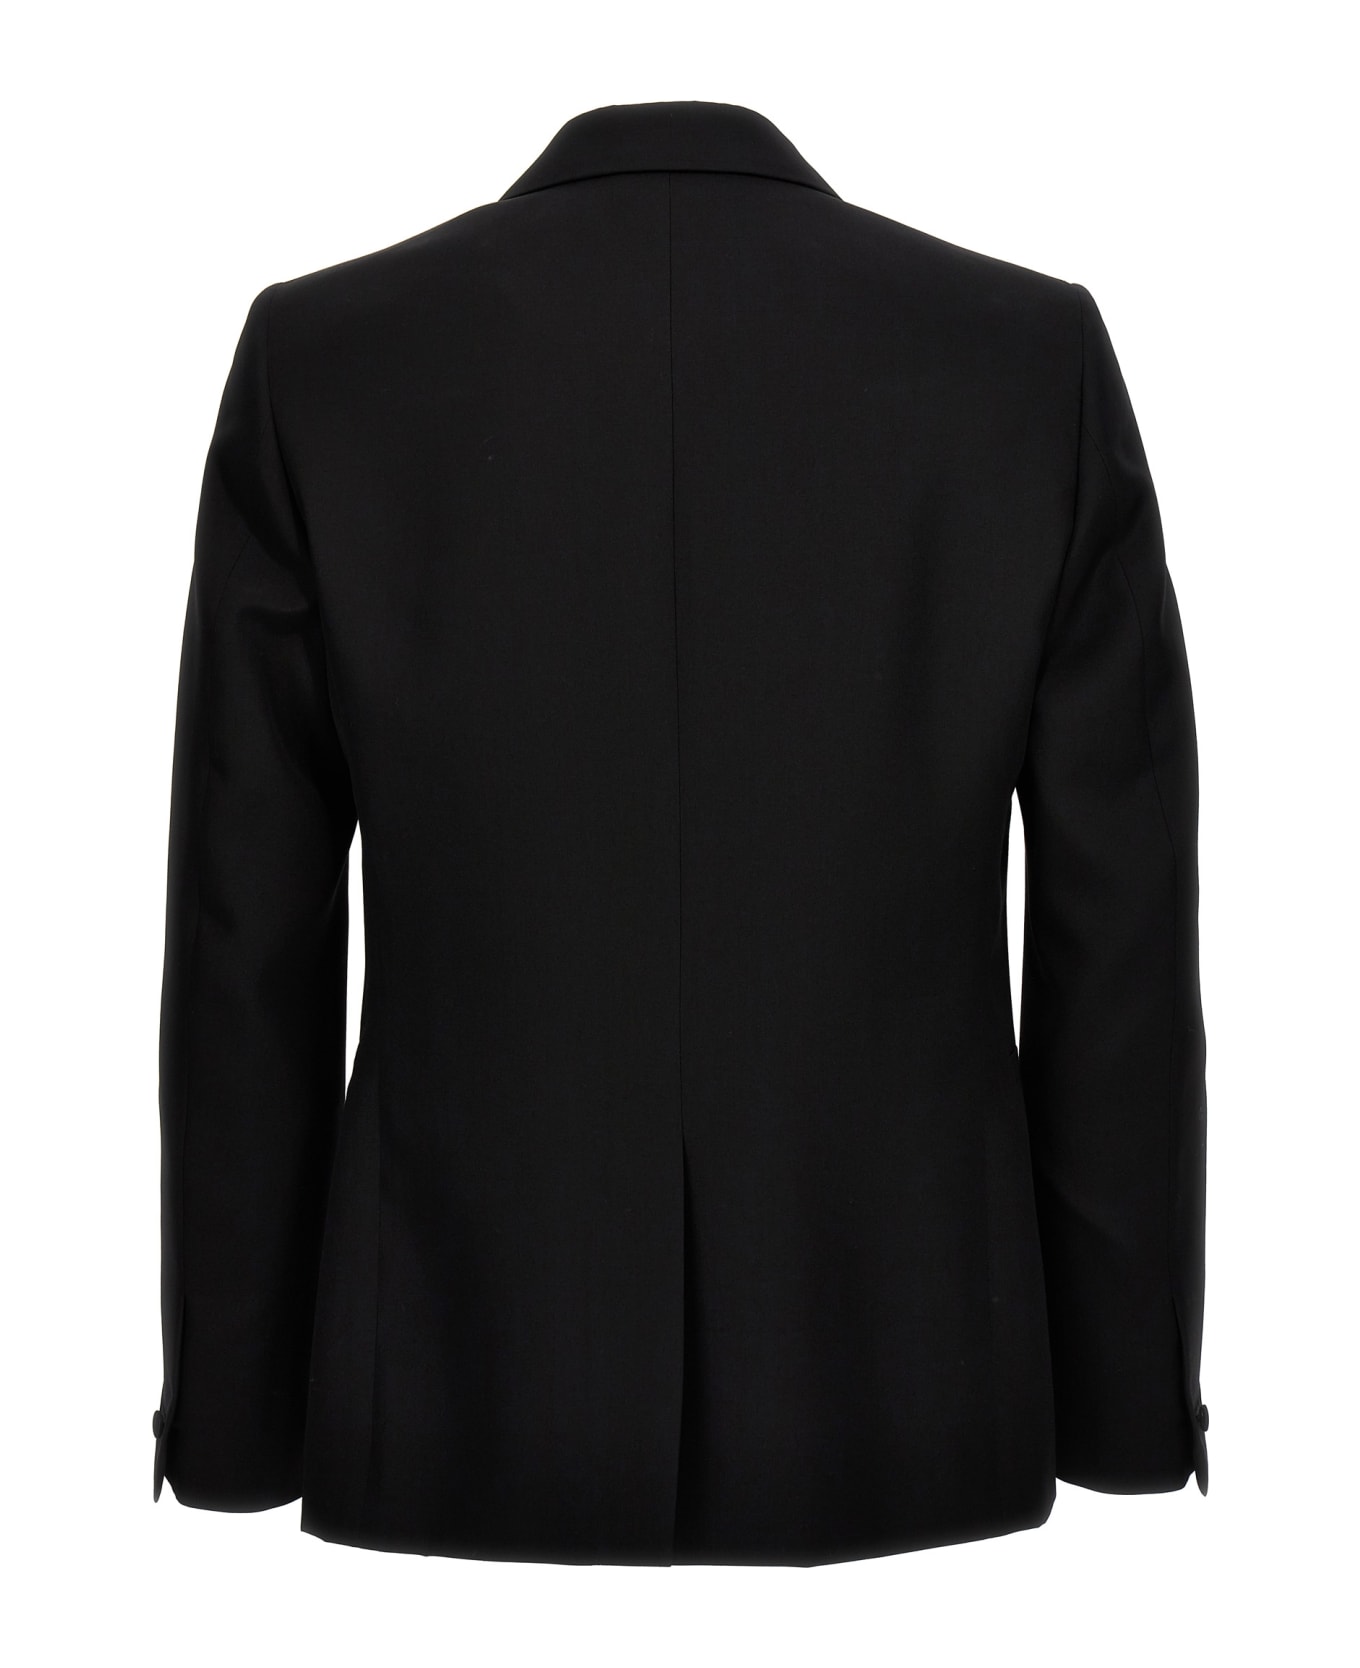 Givenchy Double-breasted Wool Blazer - Black